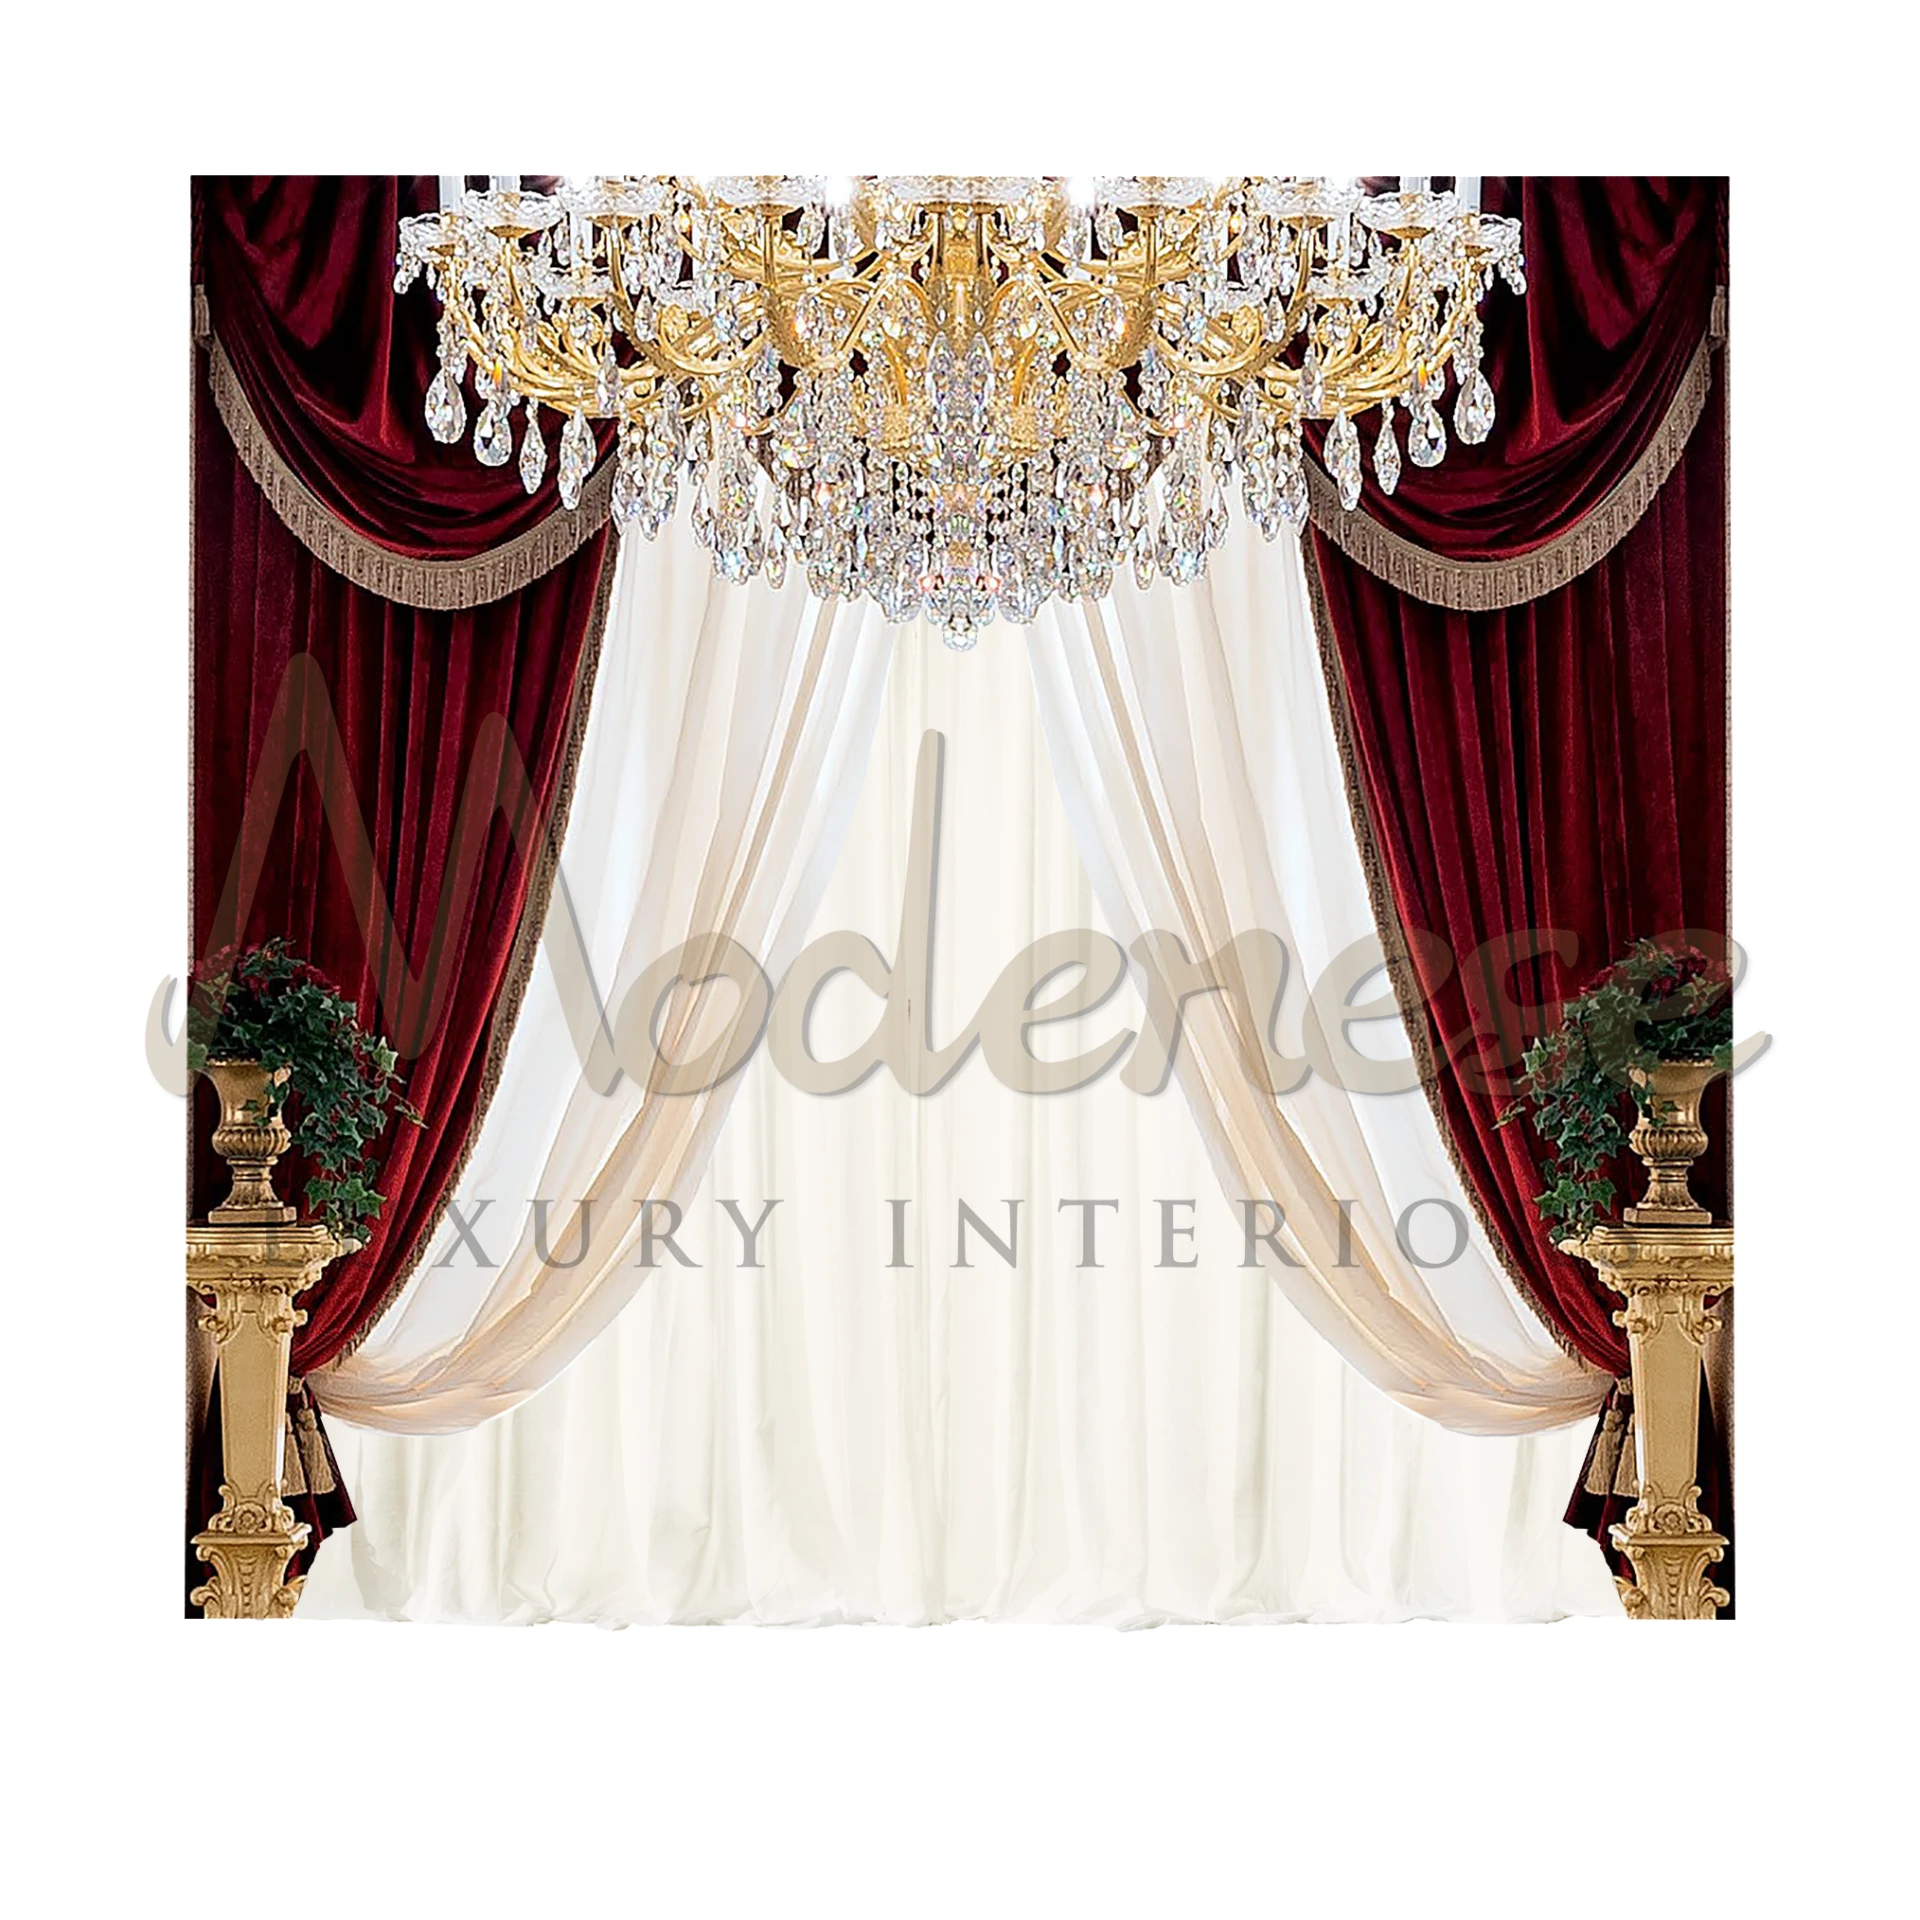 Classical Bordeaux Curtains, embodying classical design, add a rich, opulent touch to interiors with their deep wine hue